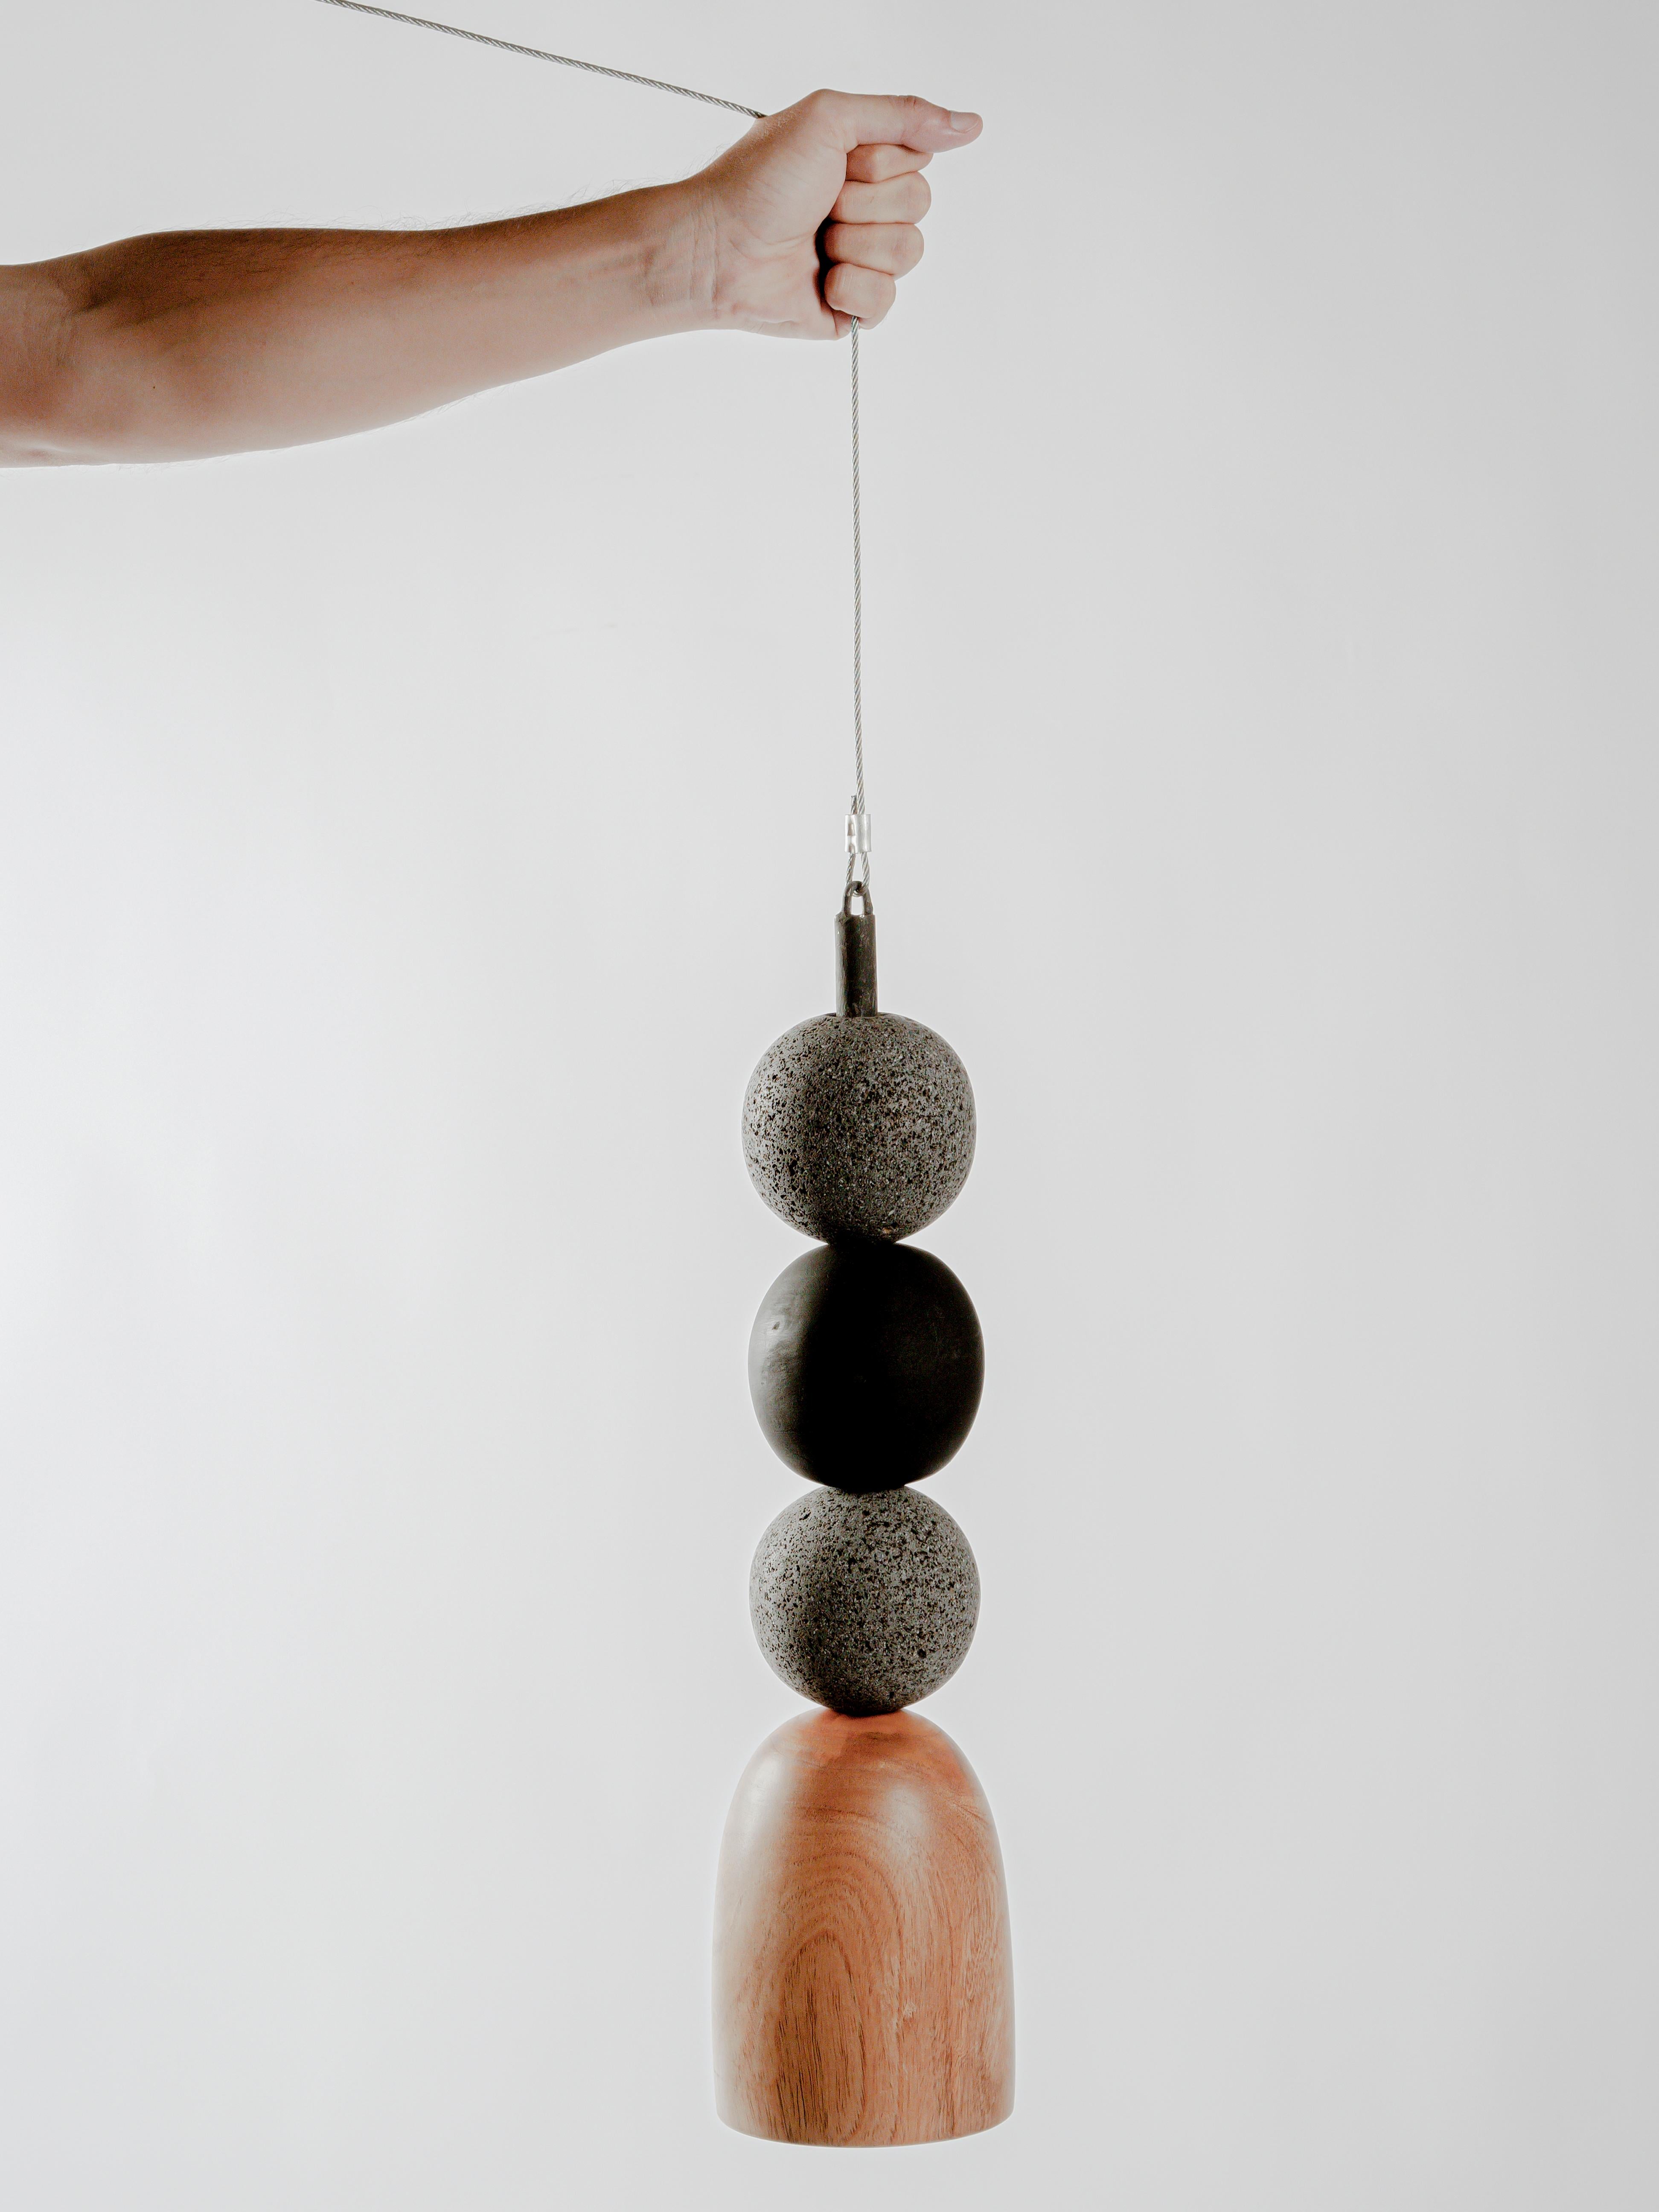 05 Lamp by Daniel Orozco
Dimensions: D 13 x H 50 cm.
Materials: Wood, Volcanic Stone

Hanging lamp with natural soap wood and volcanic stone balls and burned wood. Handmade by Mexican artisans.

All our lamps can be wired according to each country.